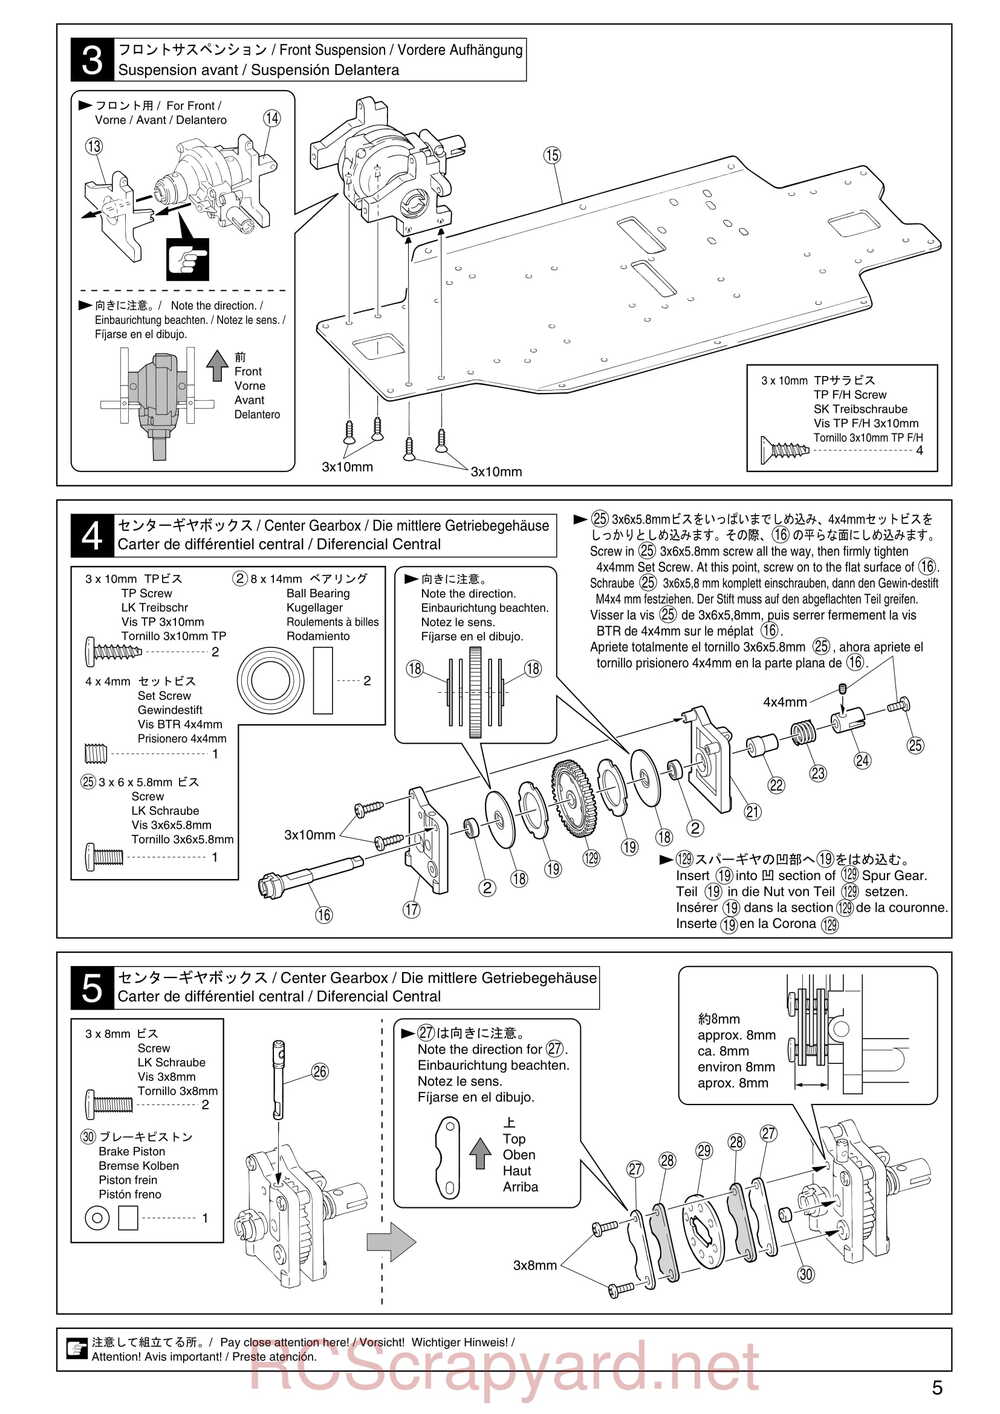 Kyosho - 31095 - TR-15 Stadium-Force - Manual - Page 05